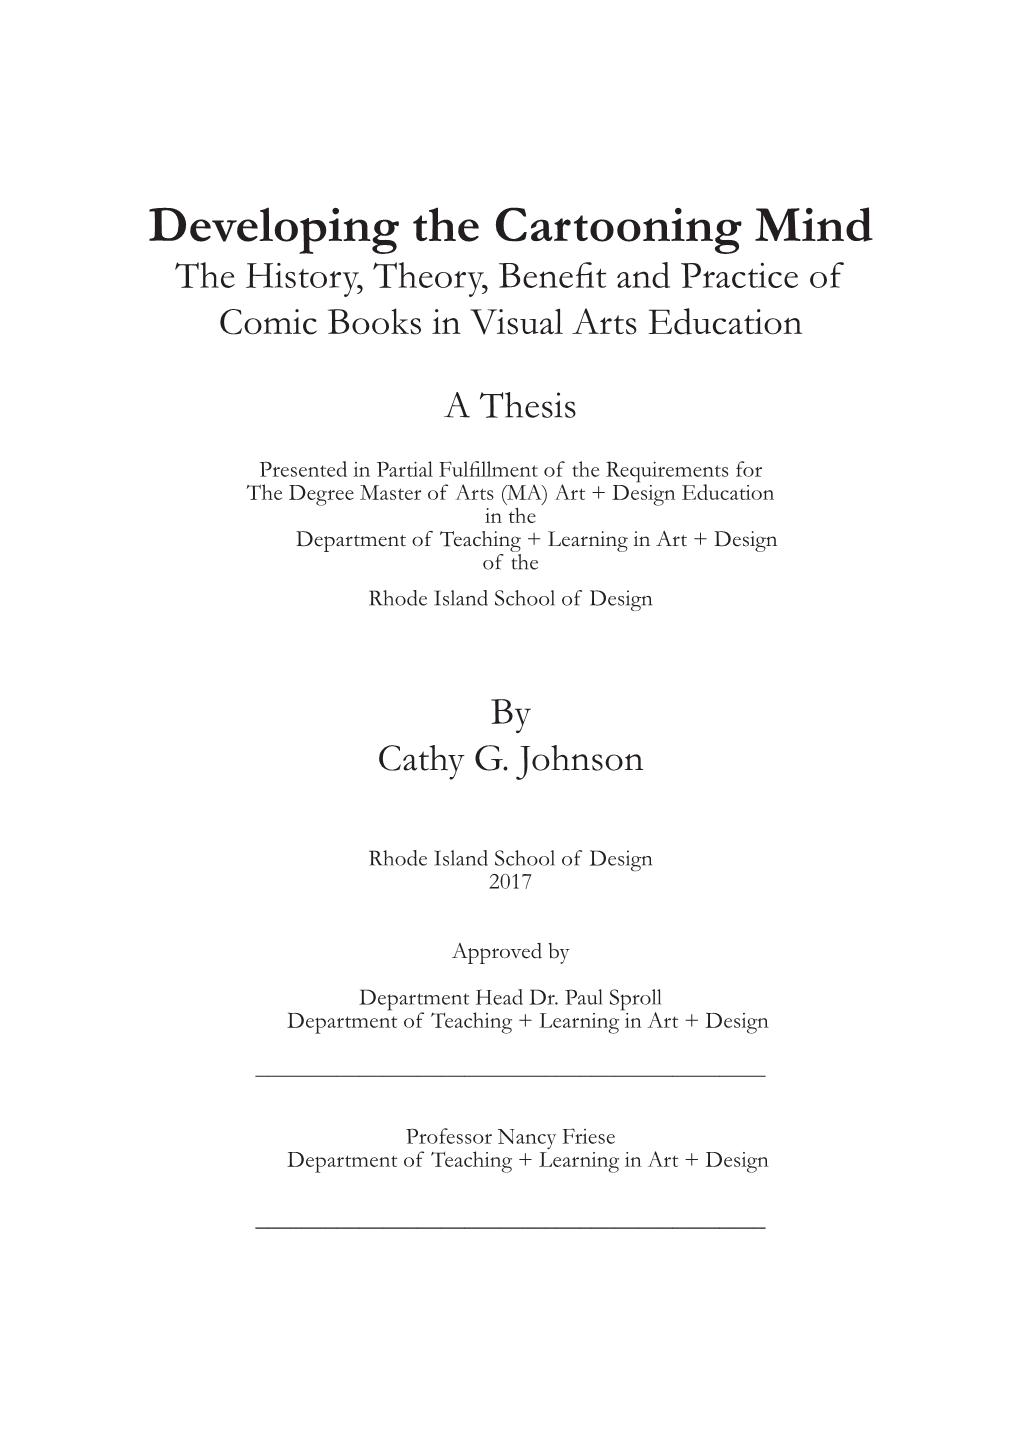 Developing the Cartooning Mind the History, Theory, Benefit and Practice of Comic Books in Visual Arts Education